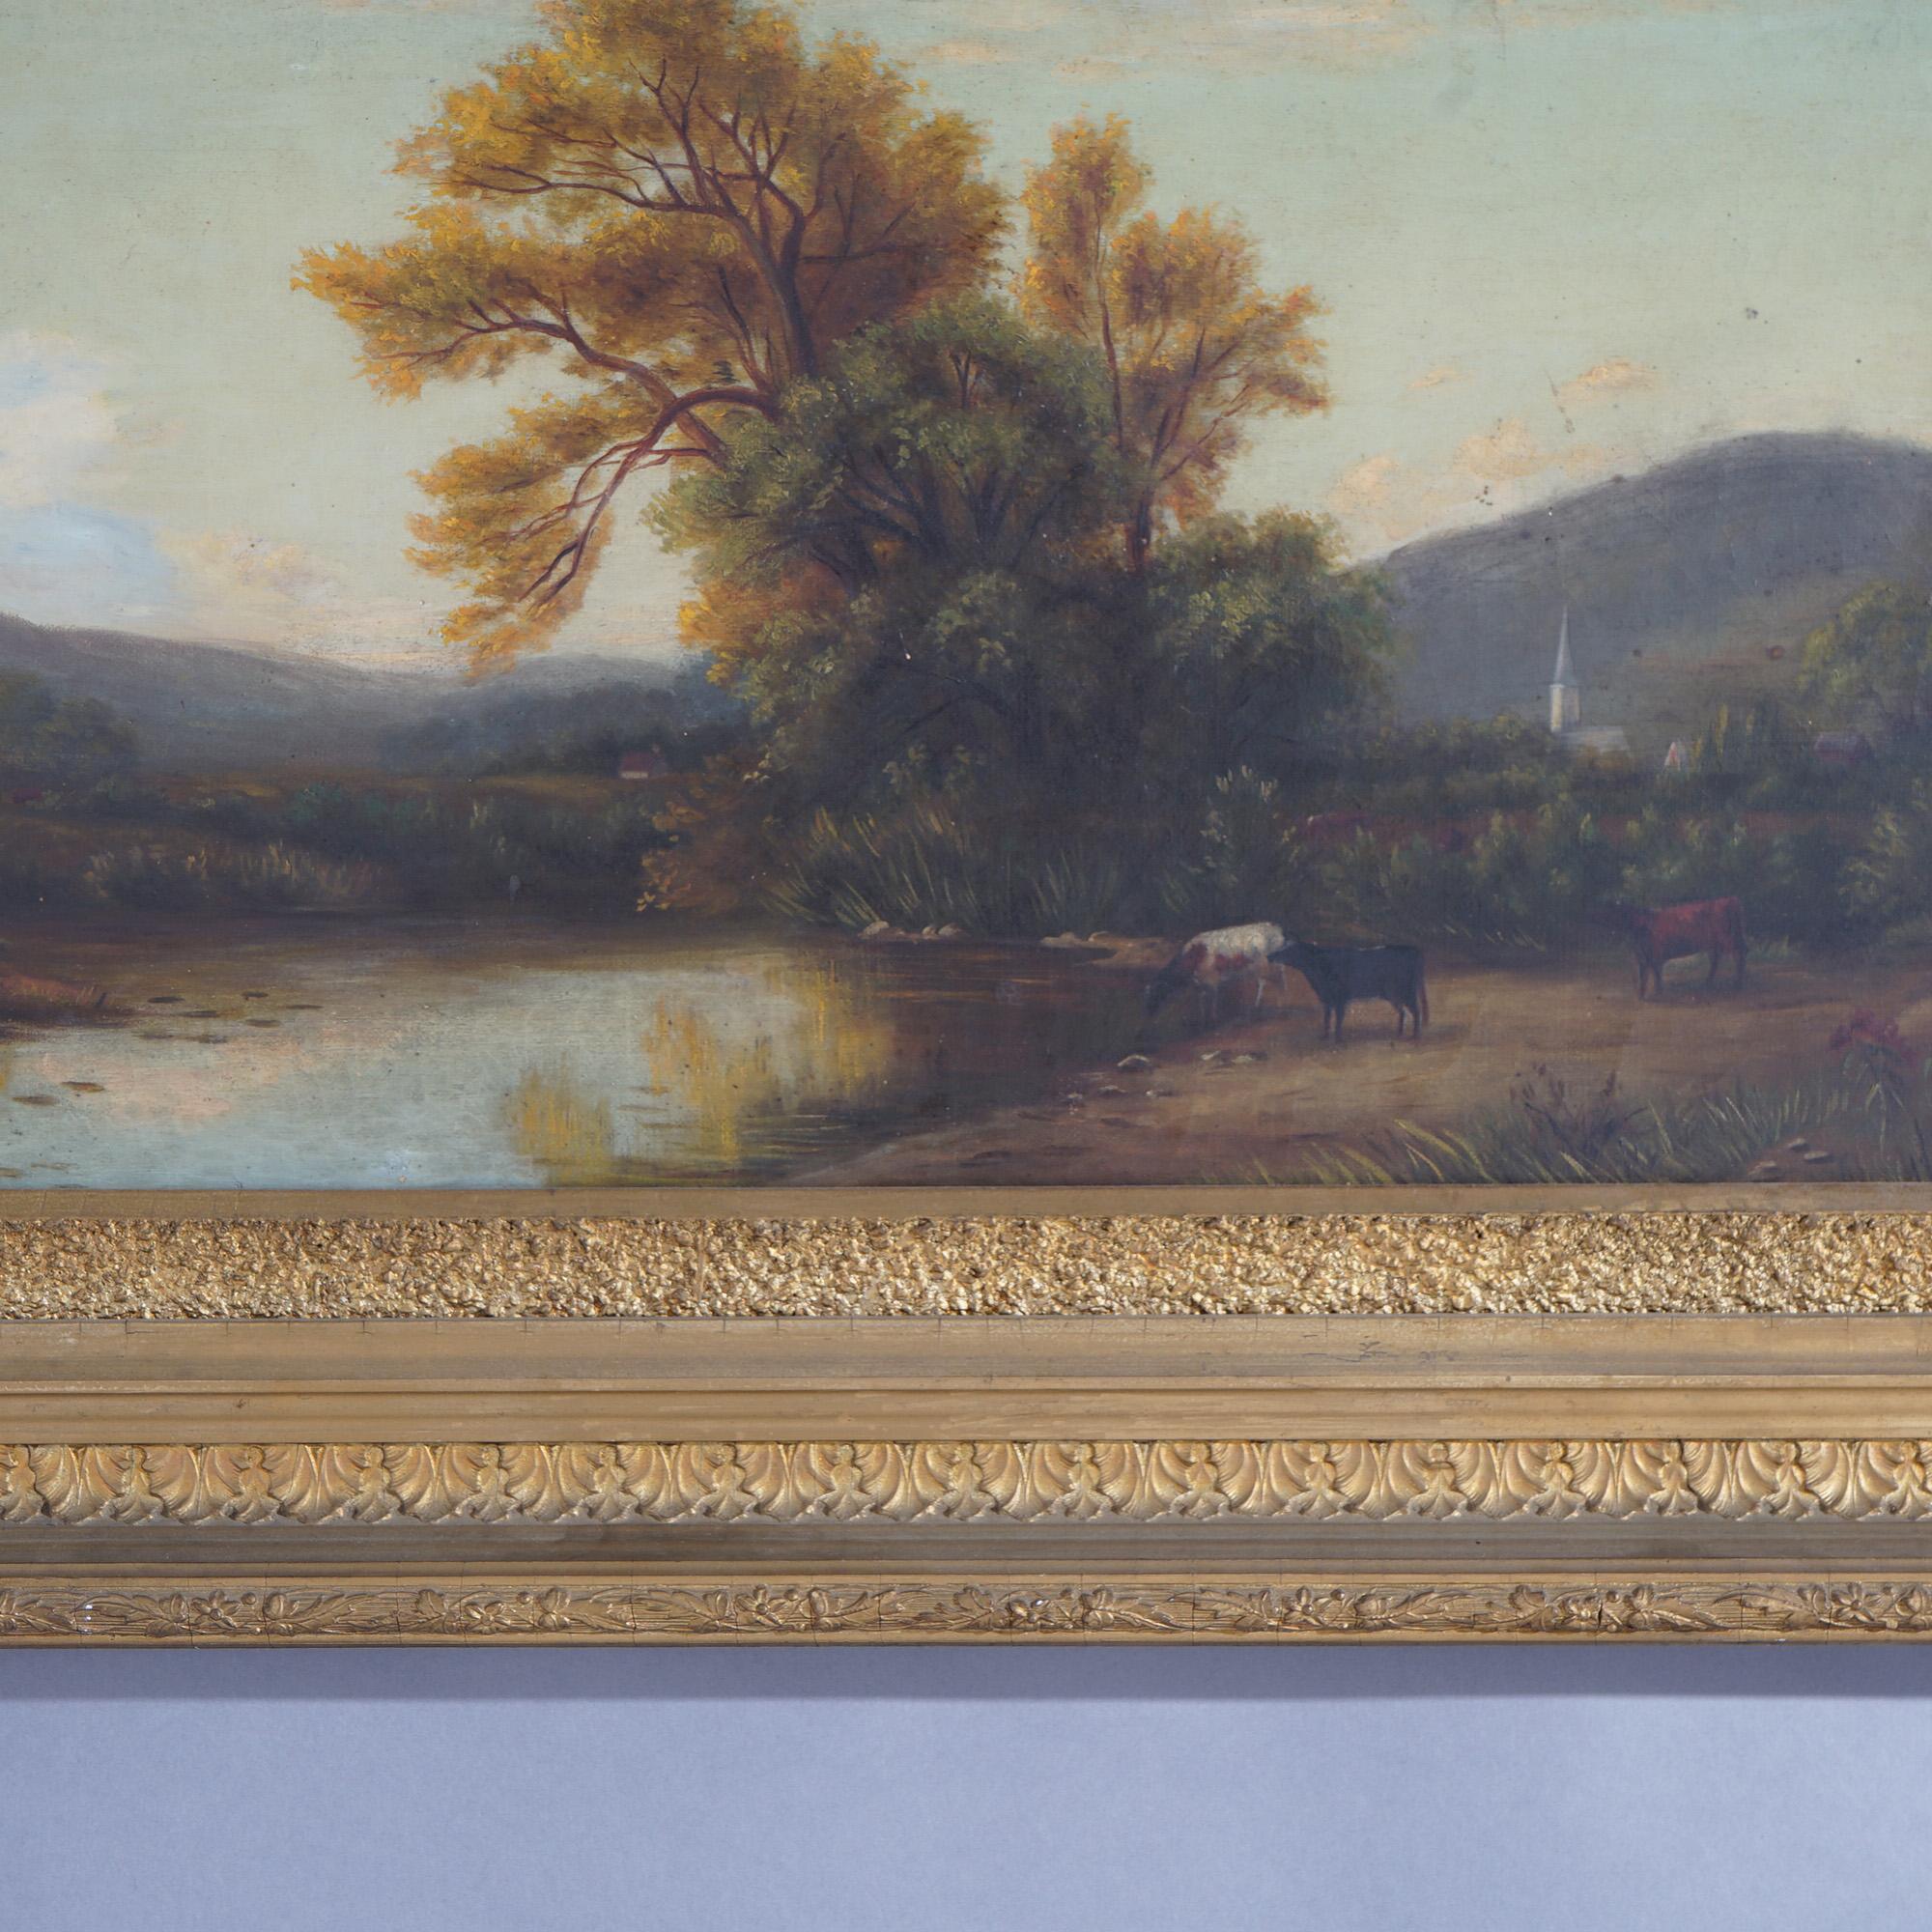 Canvas Antique Hudson River School Landscape Painting with Cattle, Stream and Church